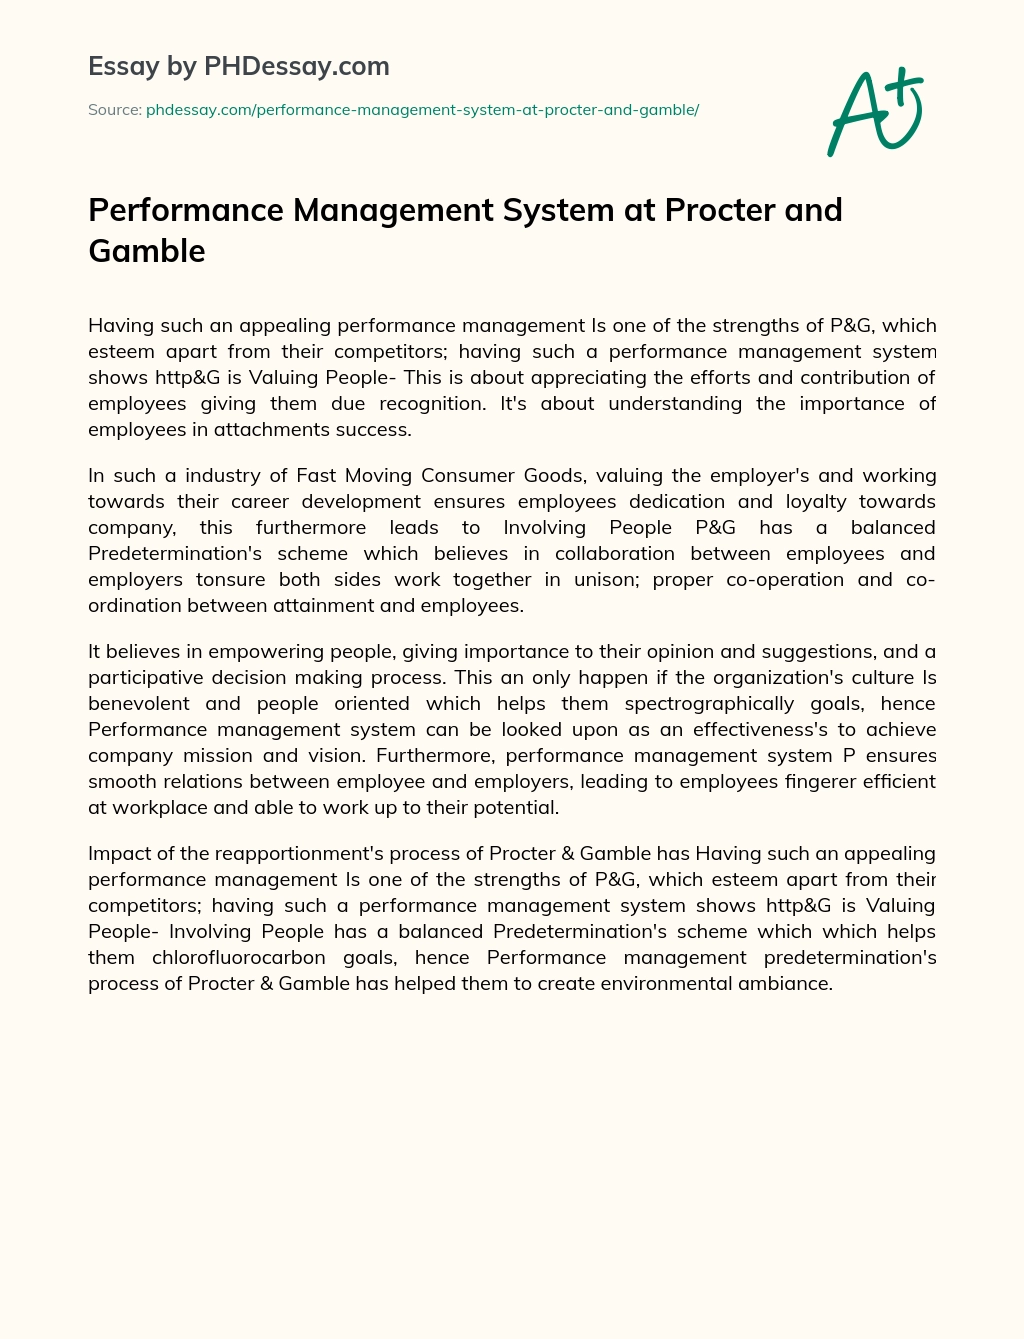 Performance Management System at Procter and Gamble essay